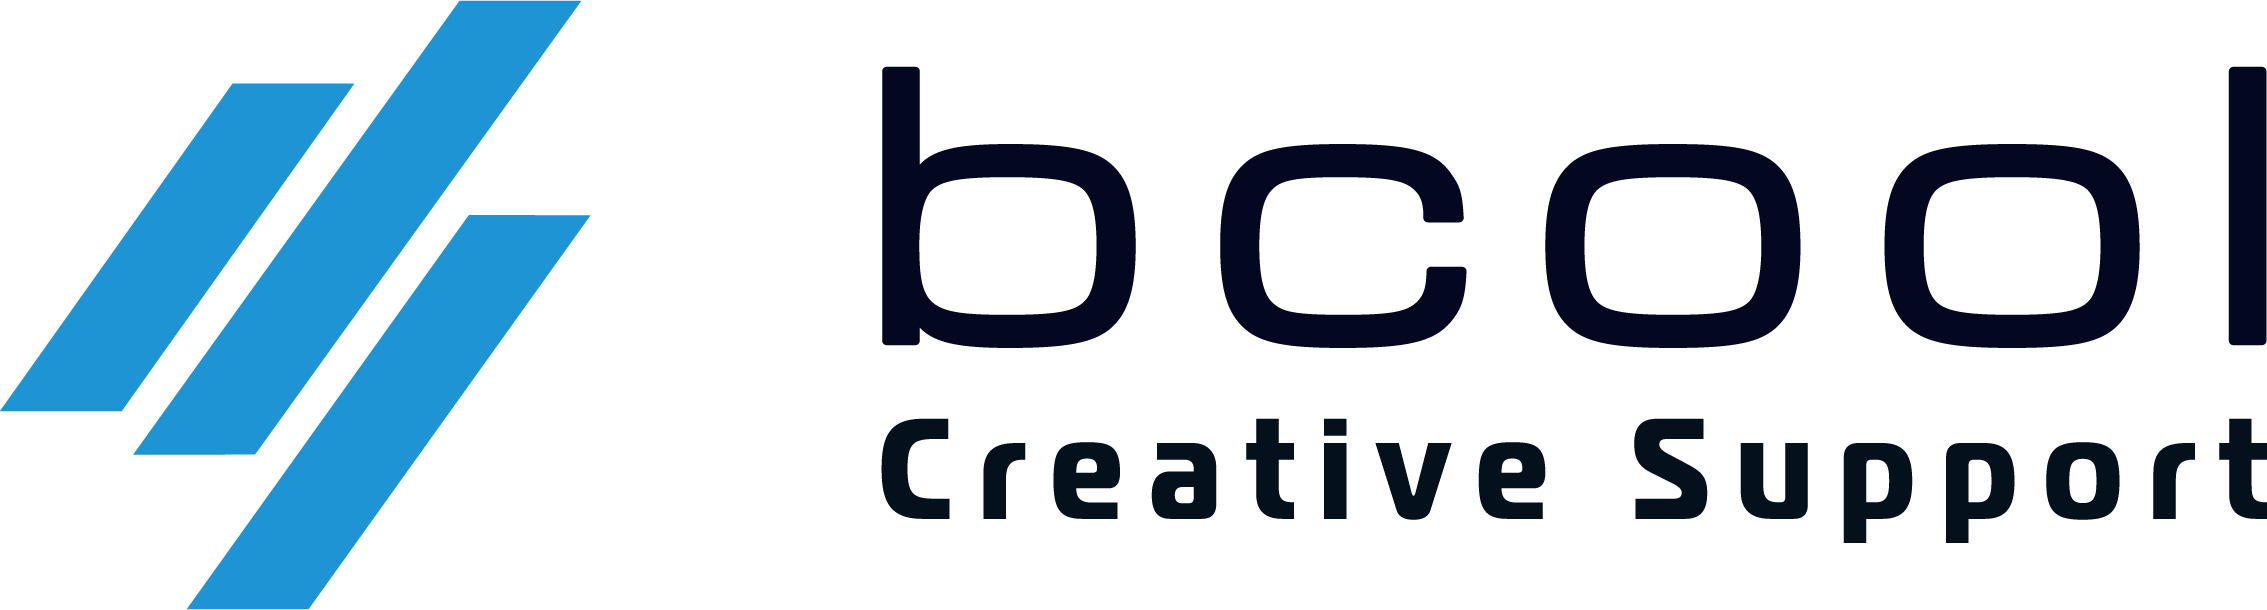 bcool creative support